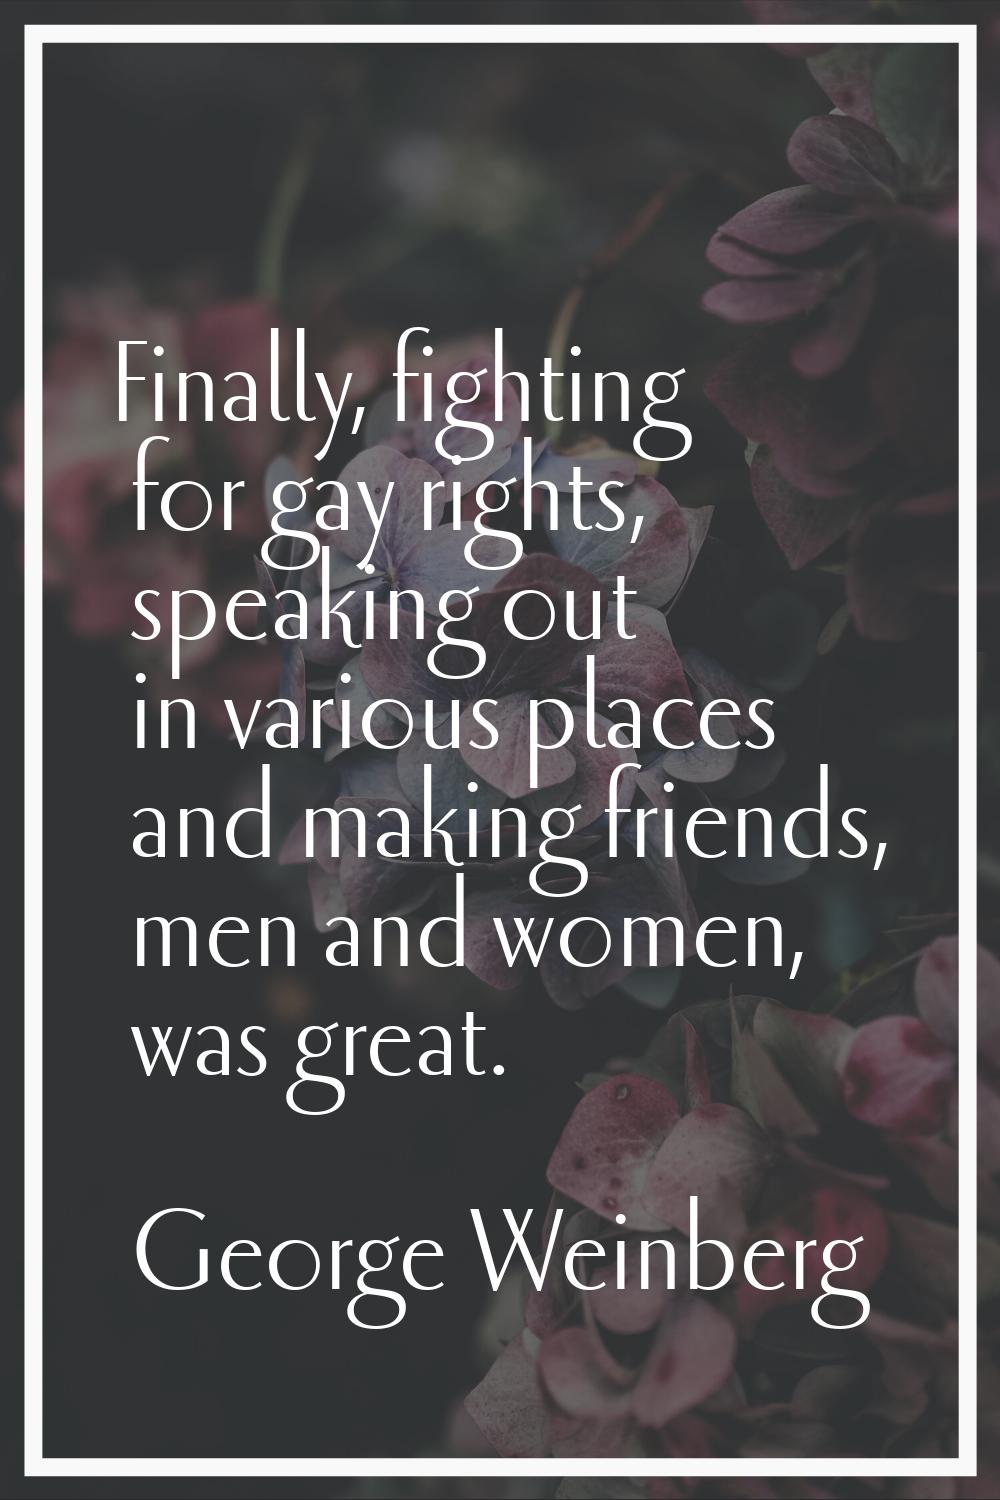 Finally, fighting for gay rights, speaking out in various places and making friends, men and women,